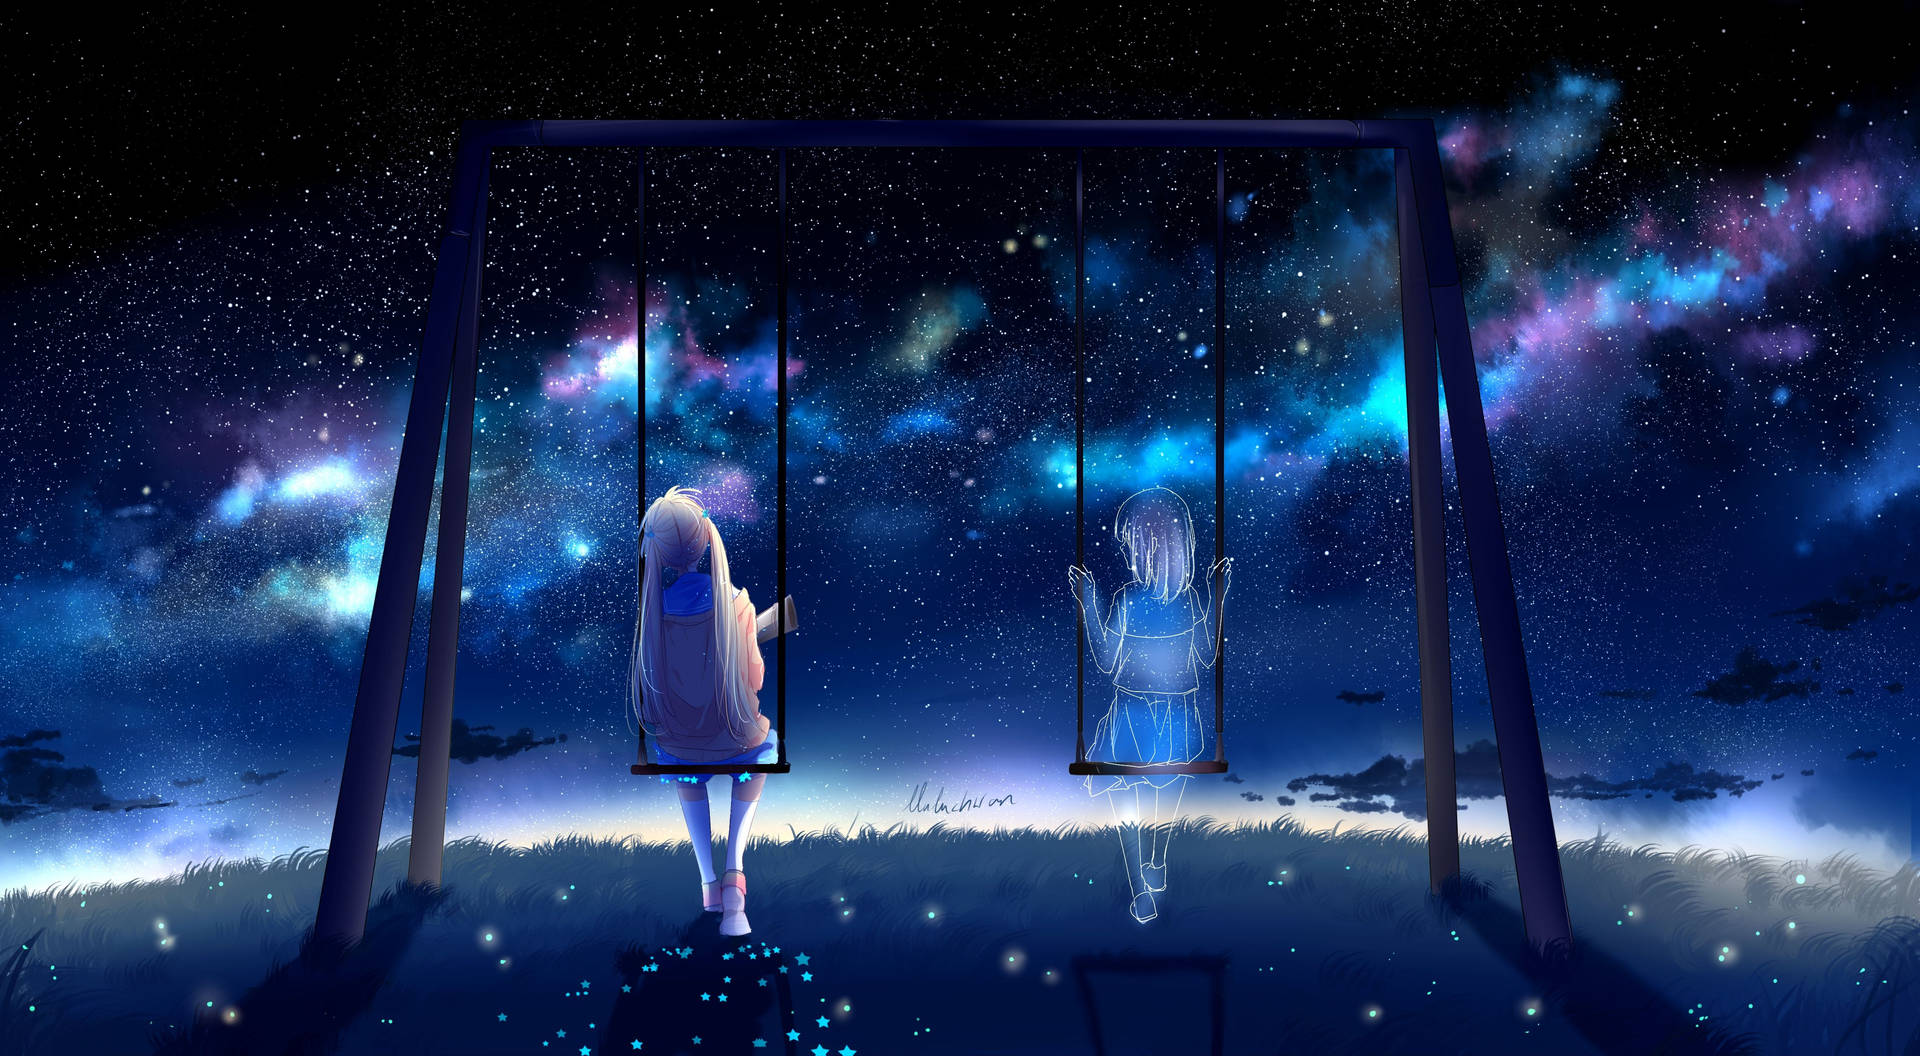 Anime Girl Sad Alone In Swing With Ghost Background